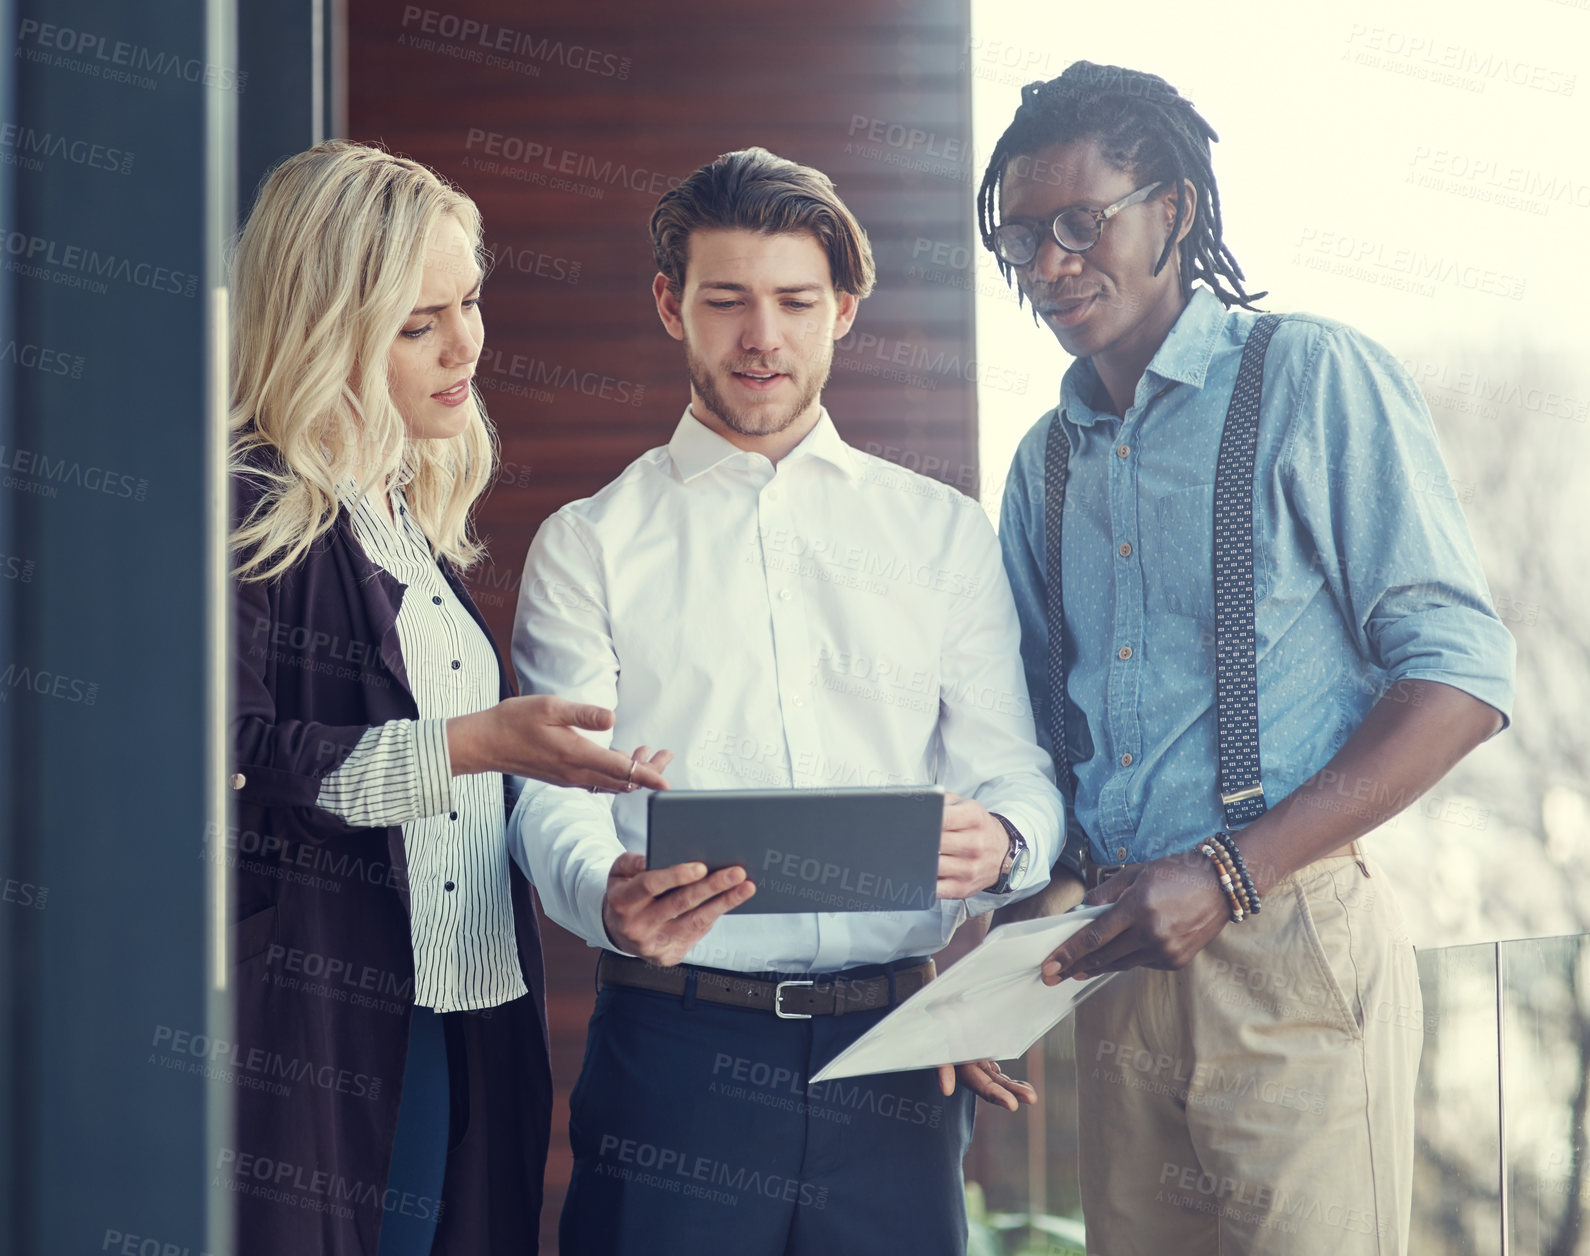 Buy stock photo Cropped shot of three young businesspeople using a tablet while standing outside on the office balcony